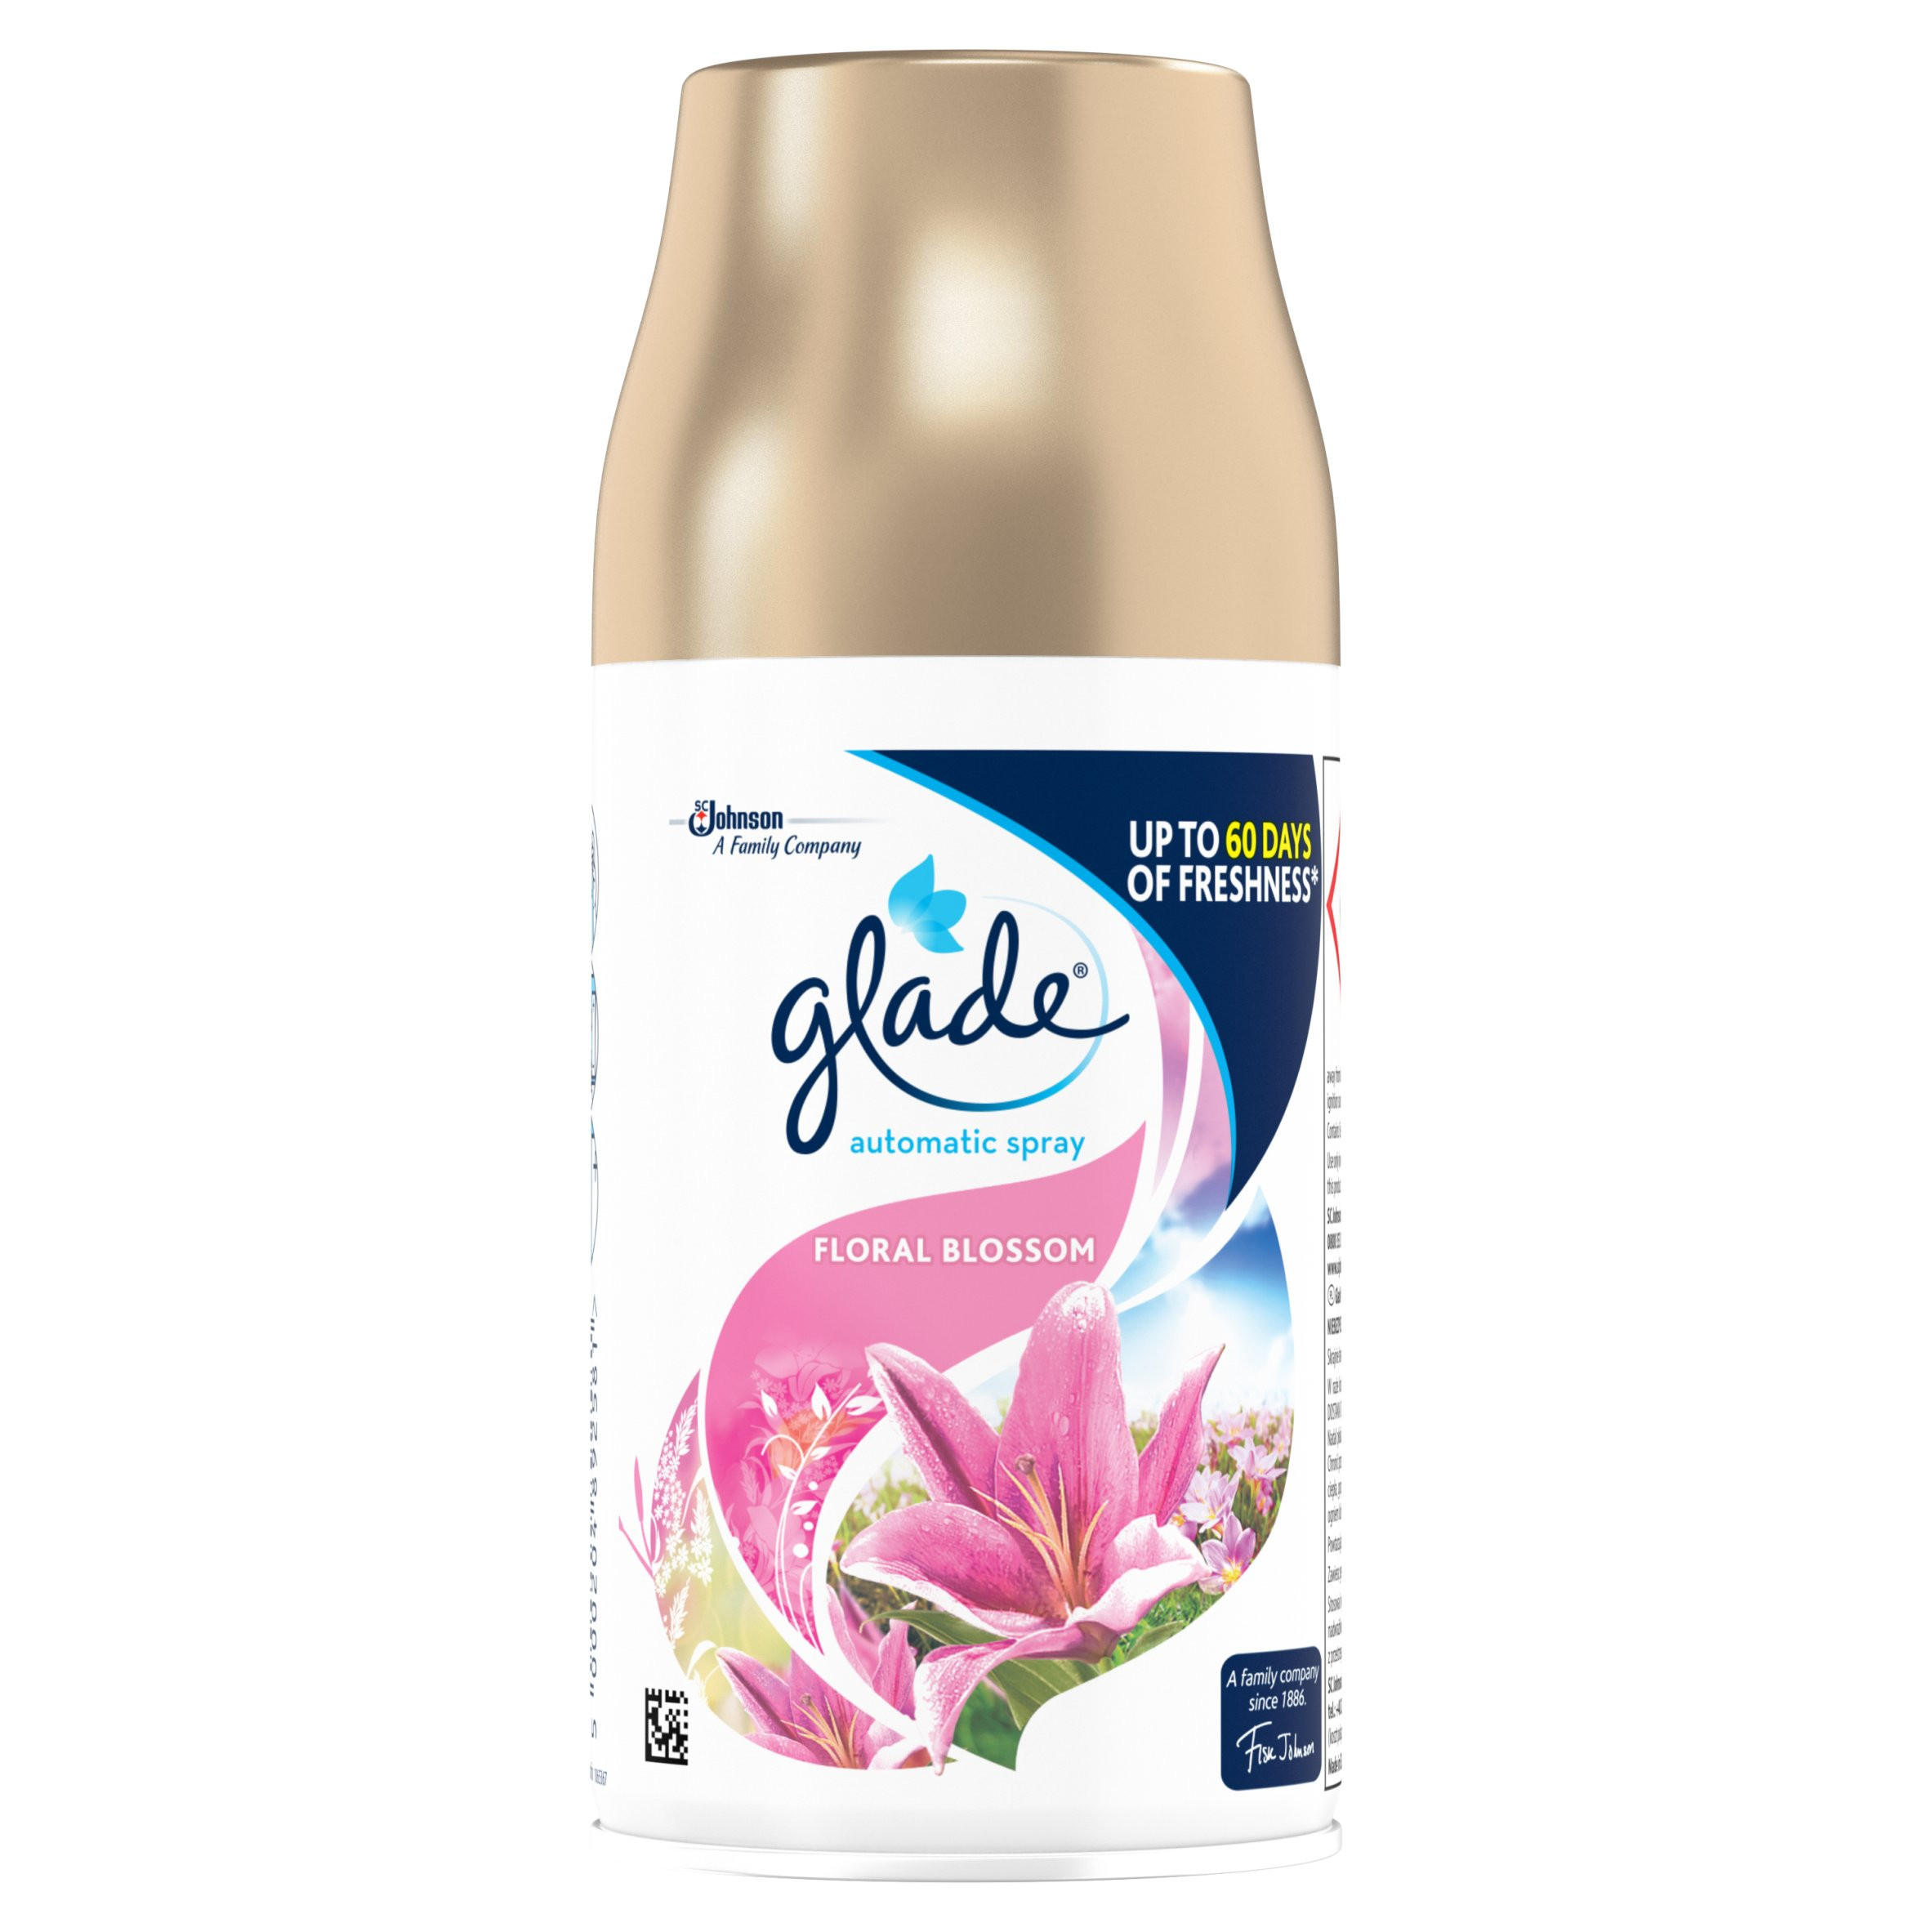 https://assets.iceland.co.uk/i/iceland/glade_automatic_spray_refill_floral_blossom_air_freshener_269ml_79848_T1.jpg